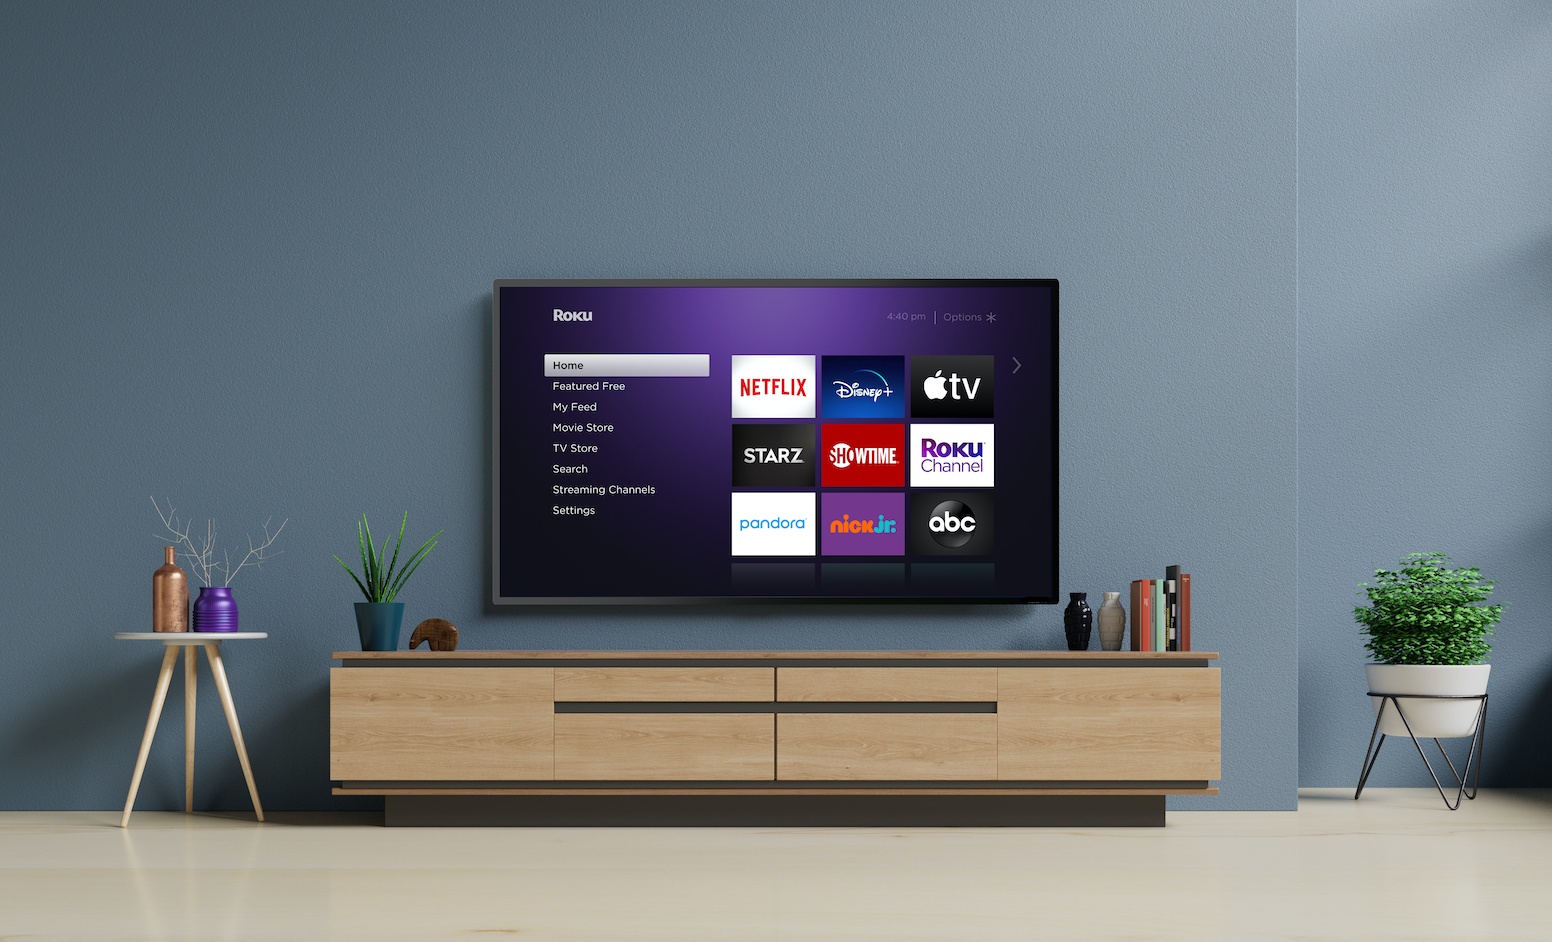 How to Use The Roku Channel’s Parental Controls